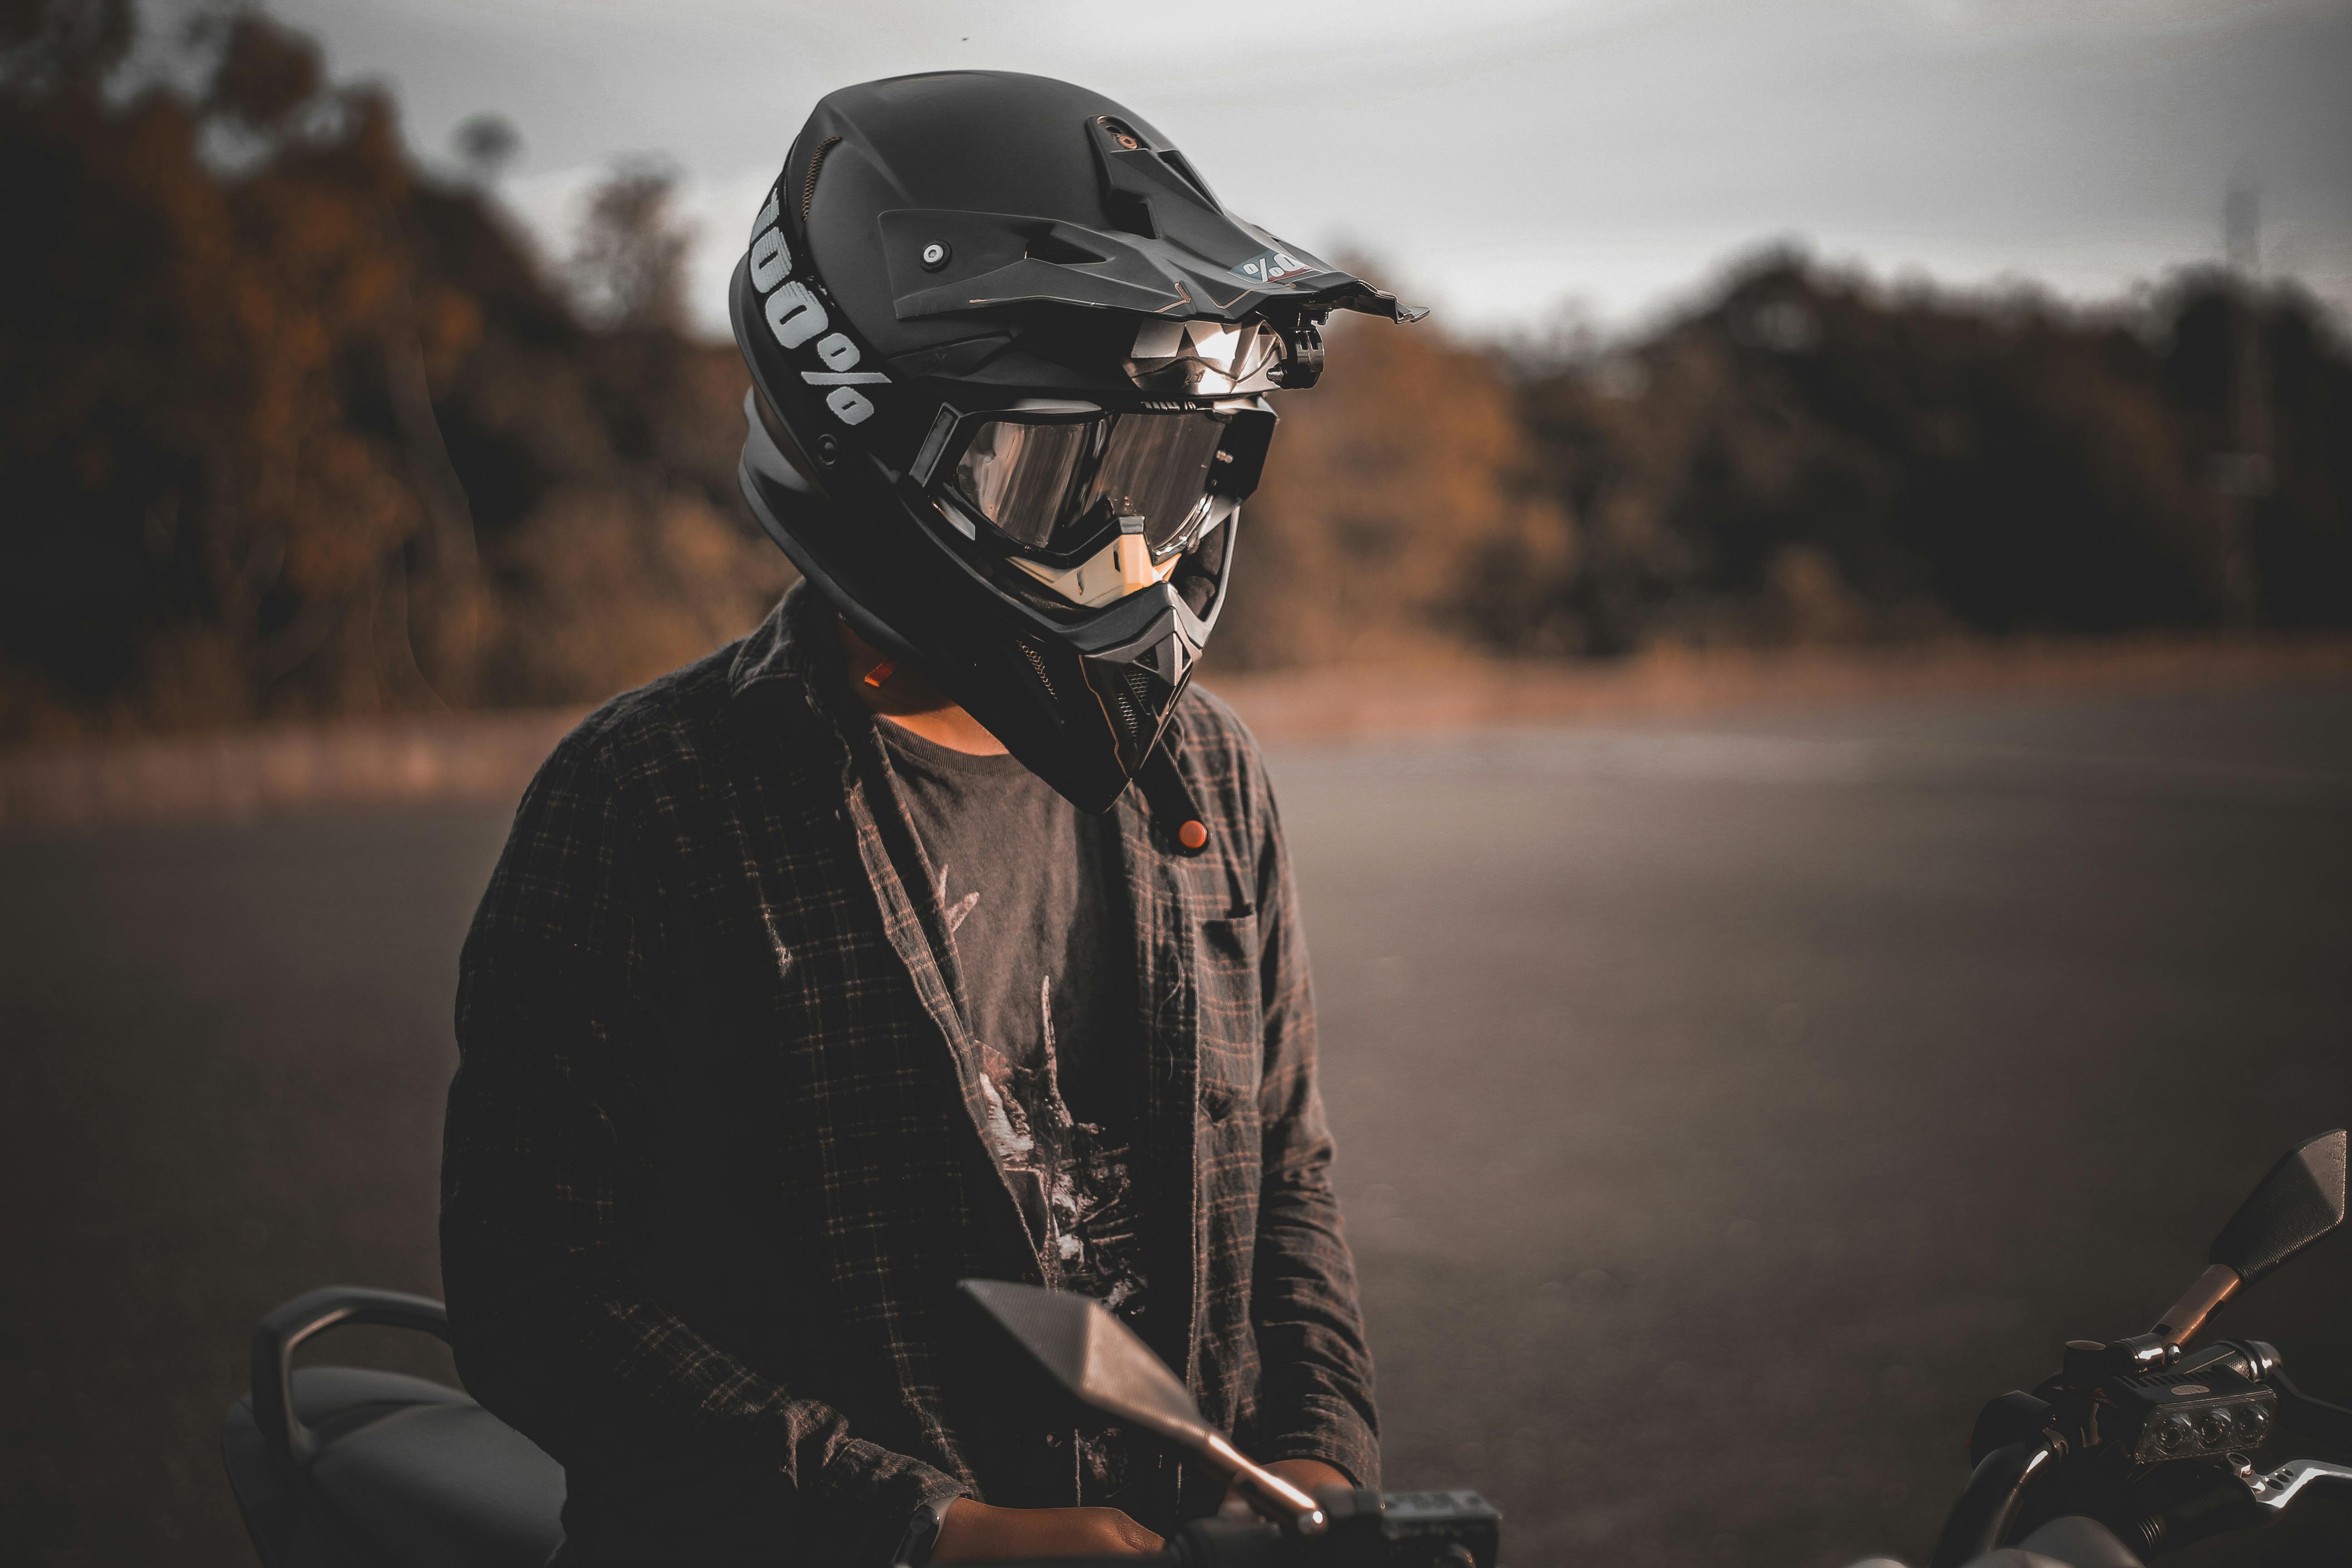 Rider Photos, Download The BEST Free Rider Stock Photos & HD Images